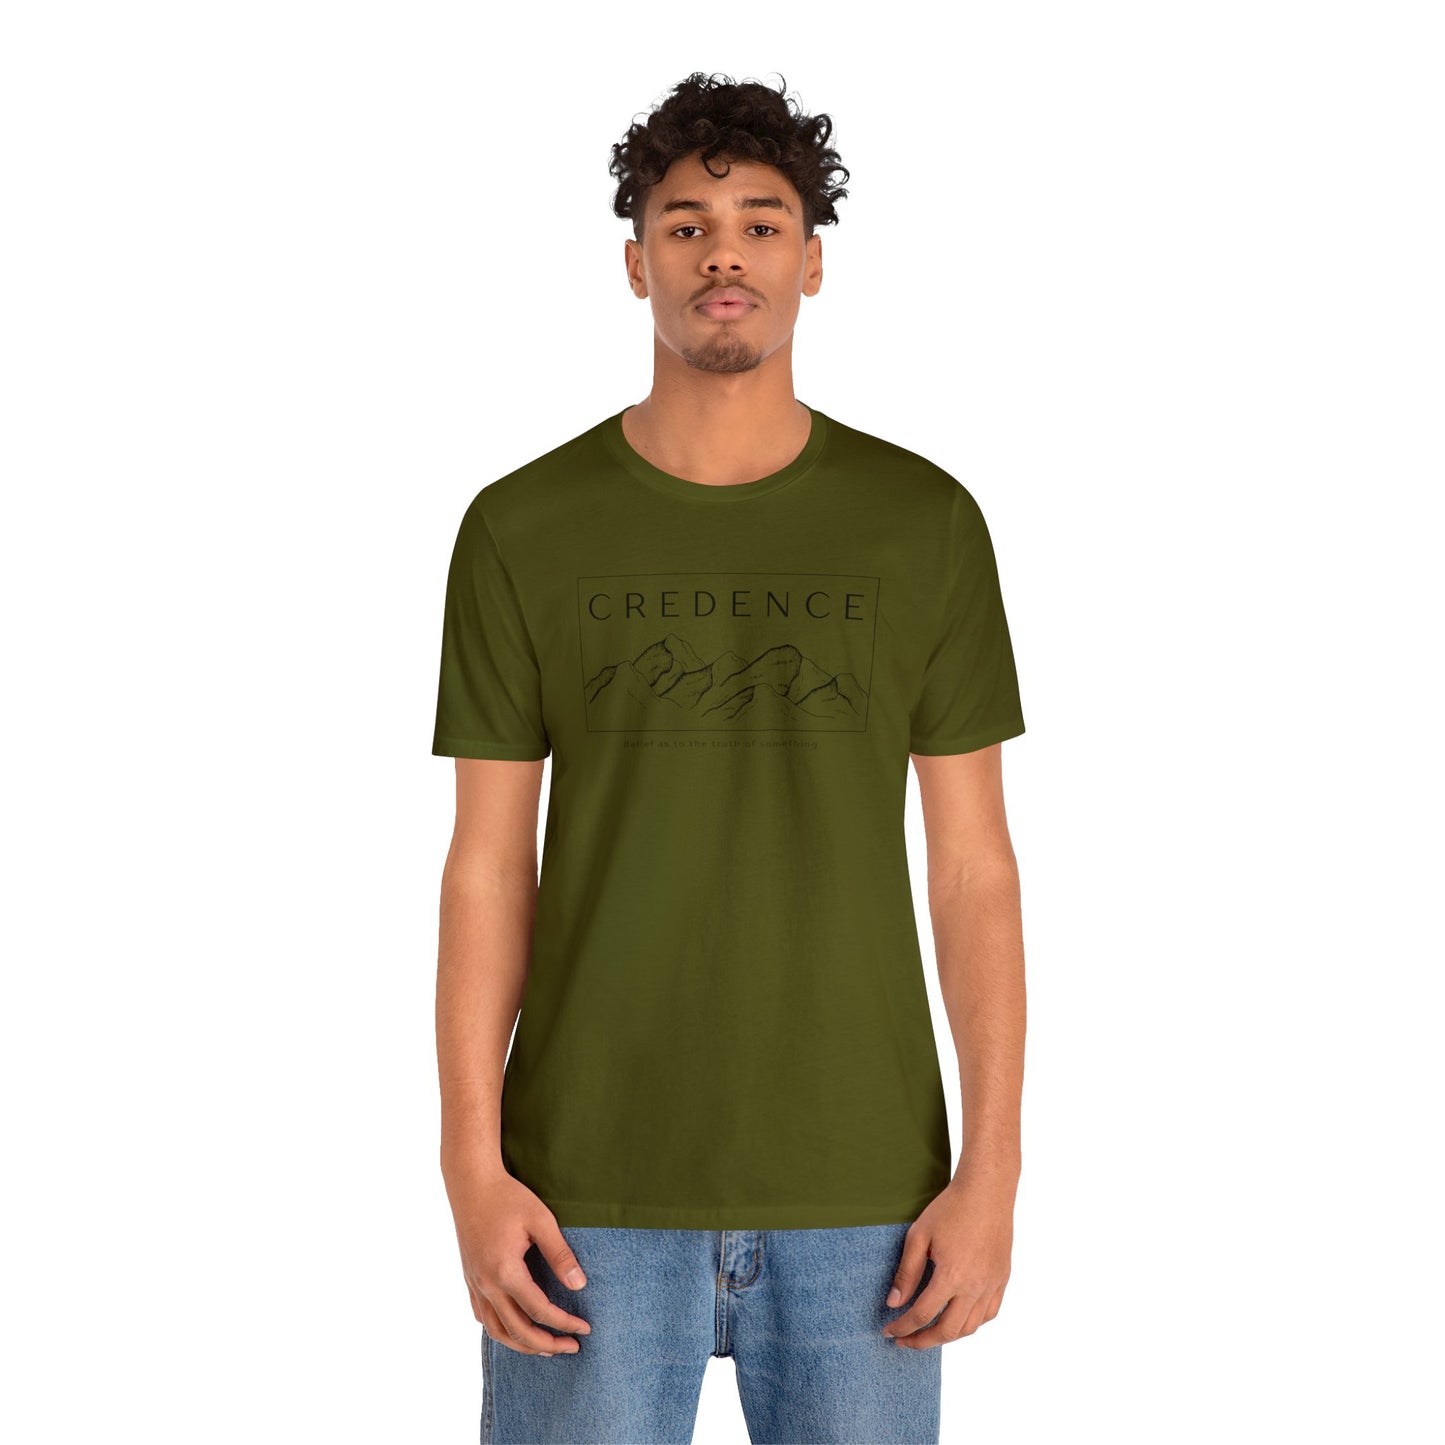 Credence T-Shirt